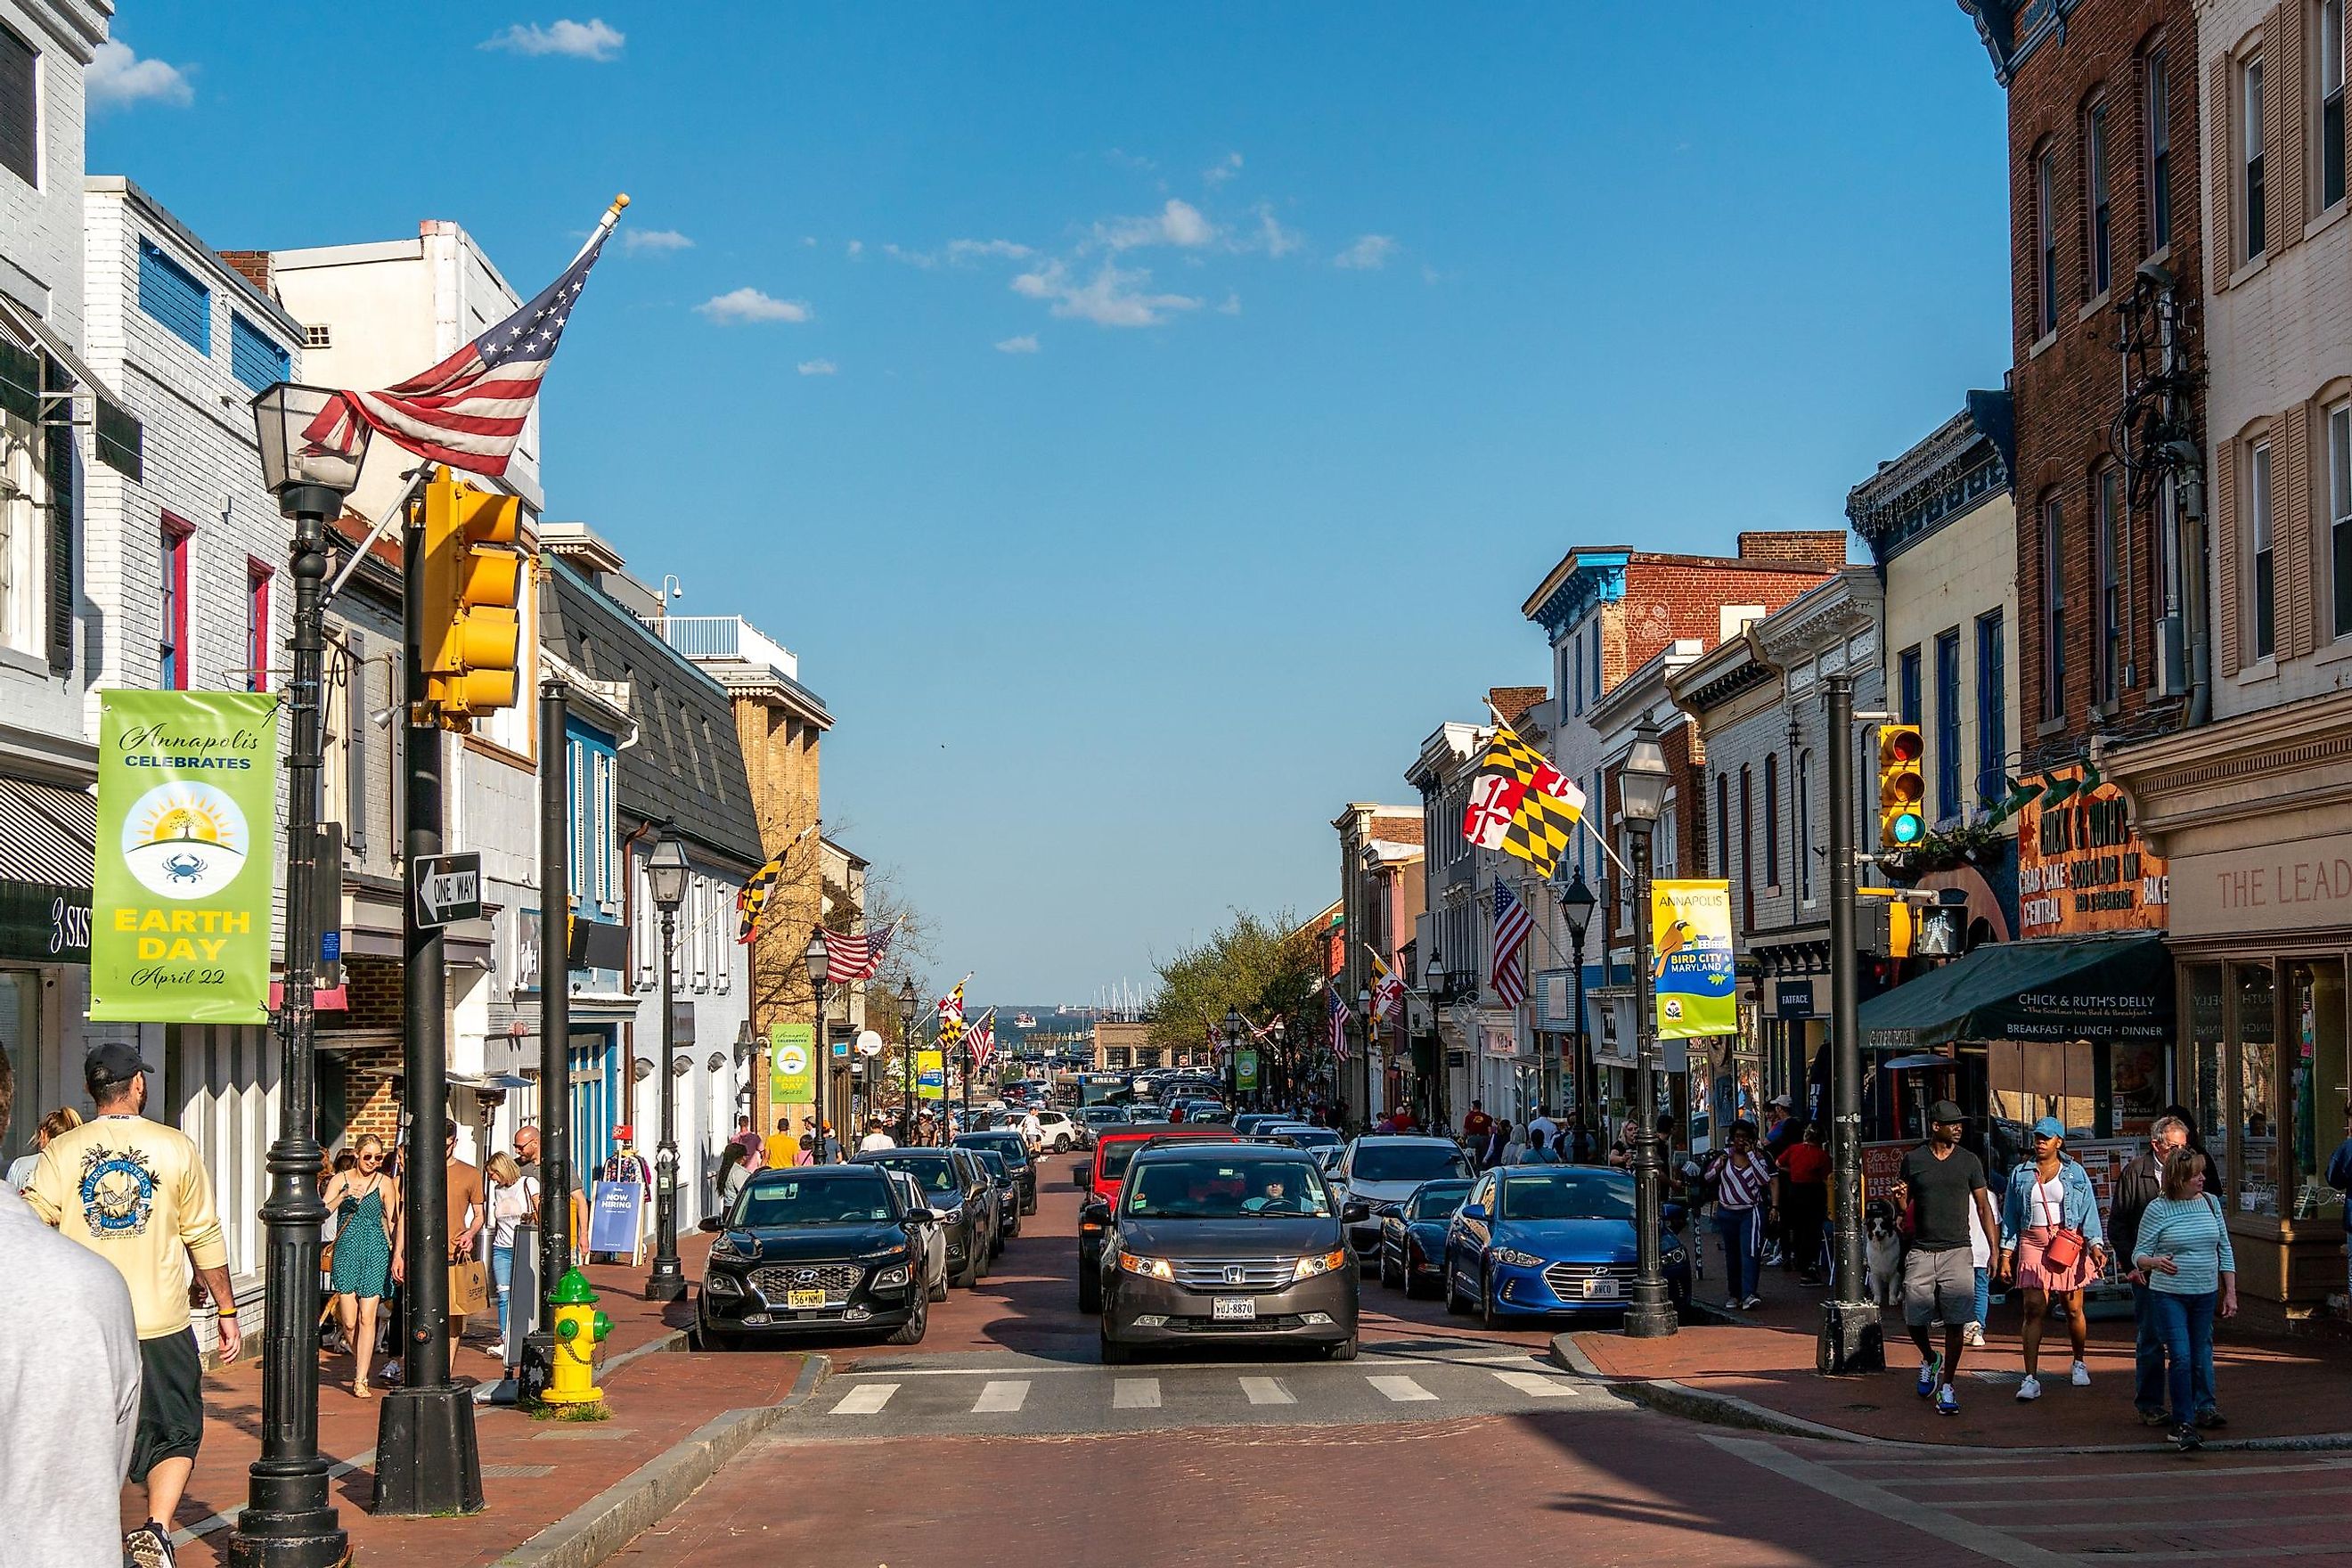 The people and traffic in the main street of Annapolis, Maryland, USA